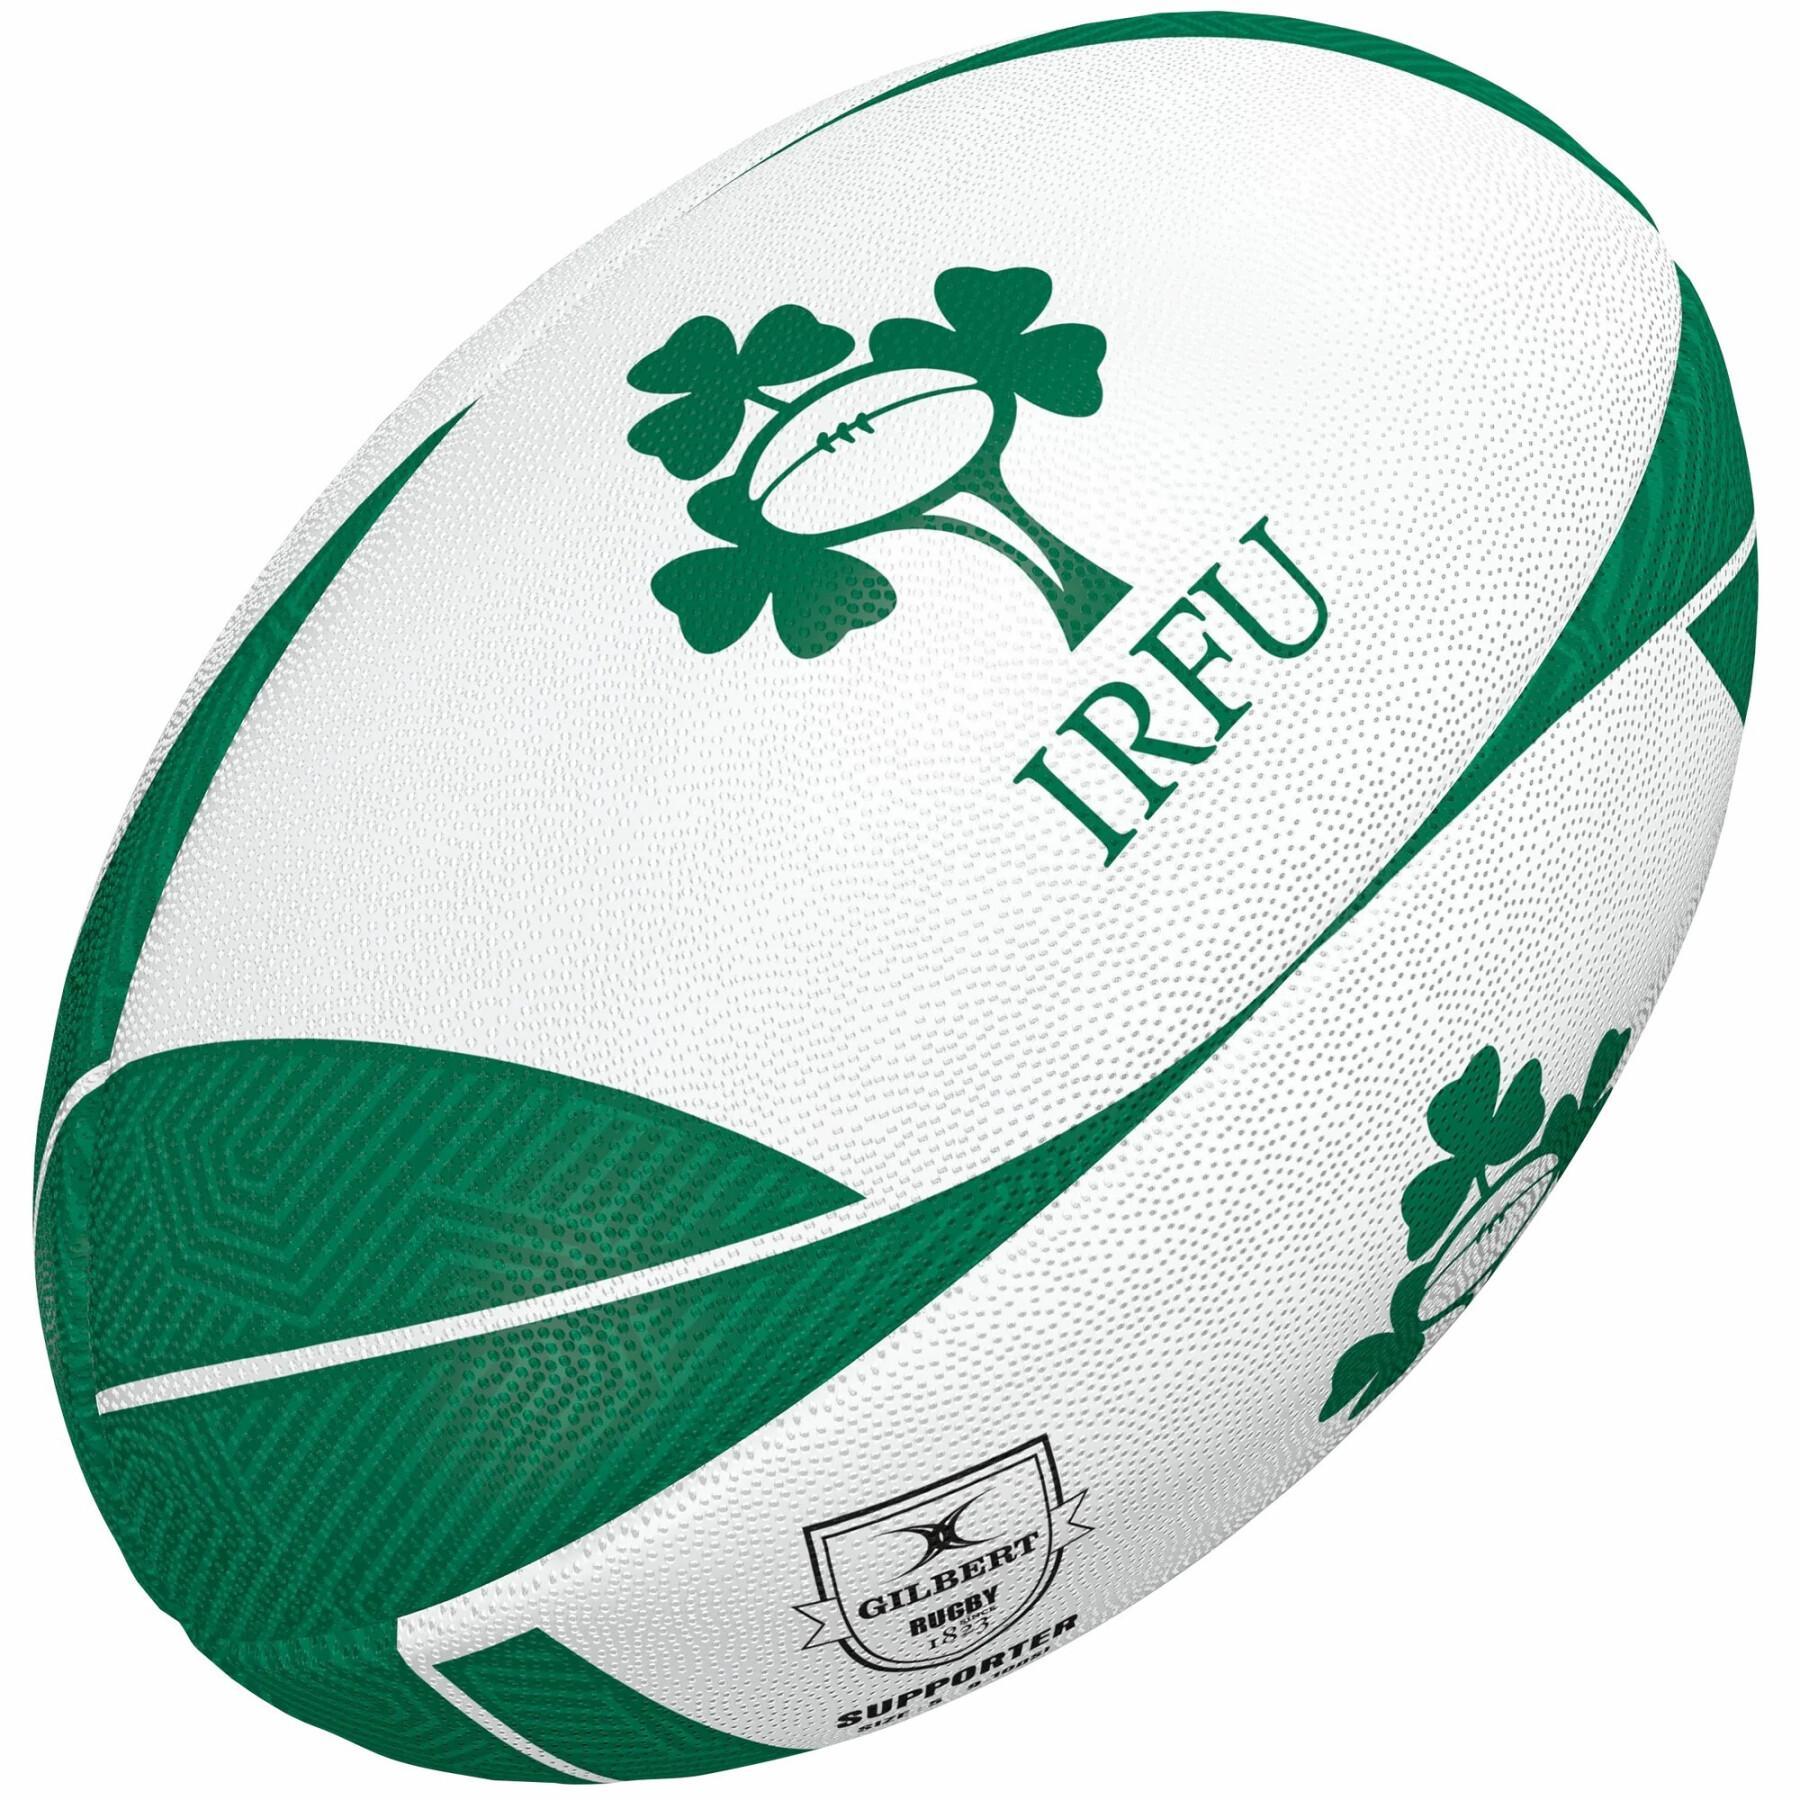 Pack of 25 Rugby balls Ireland